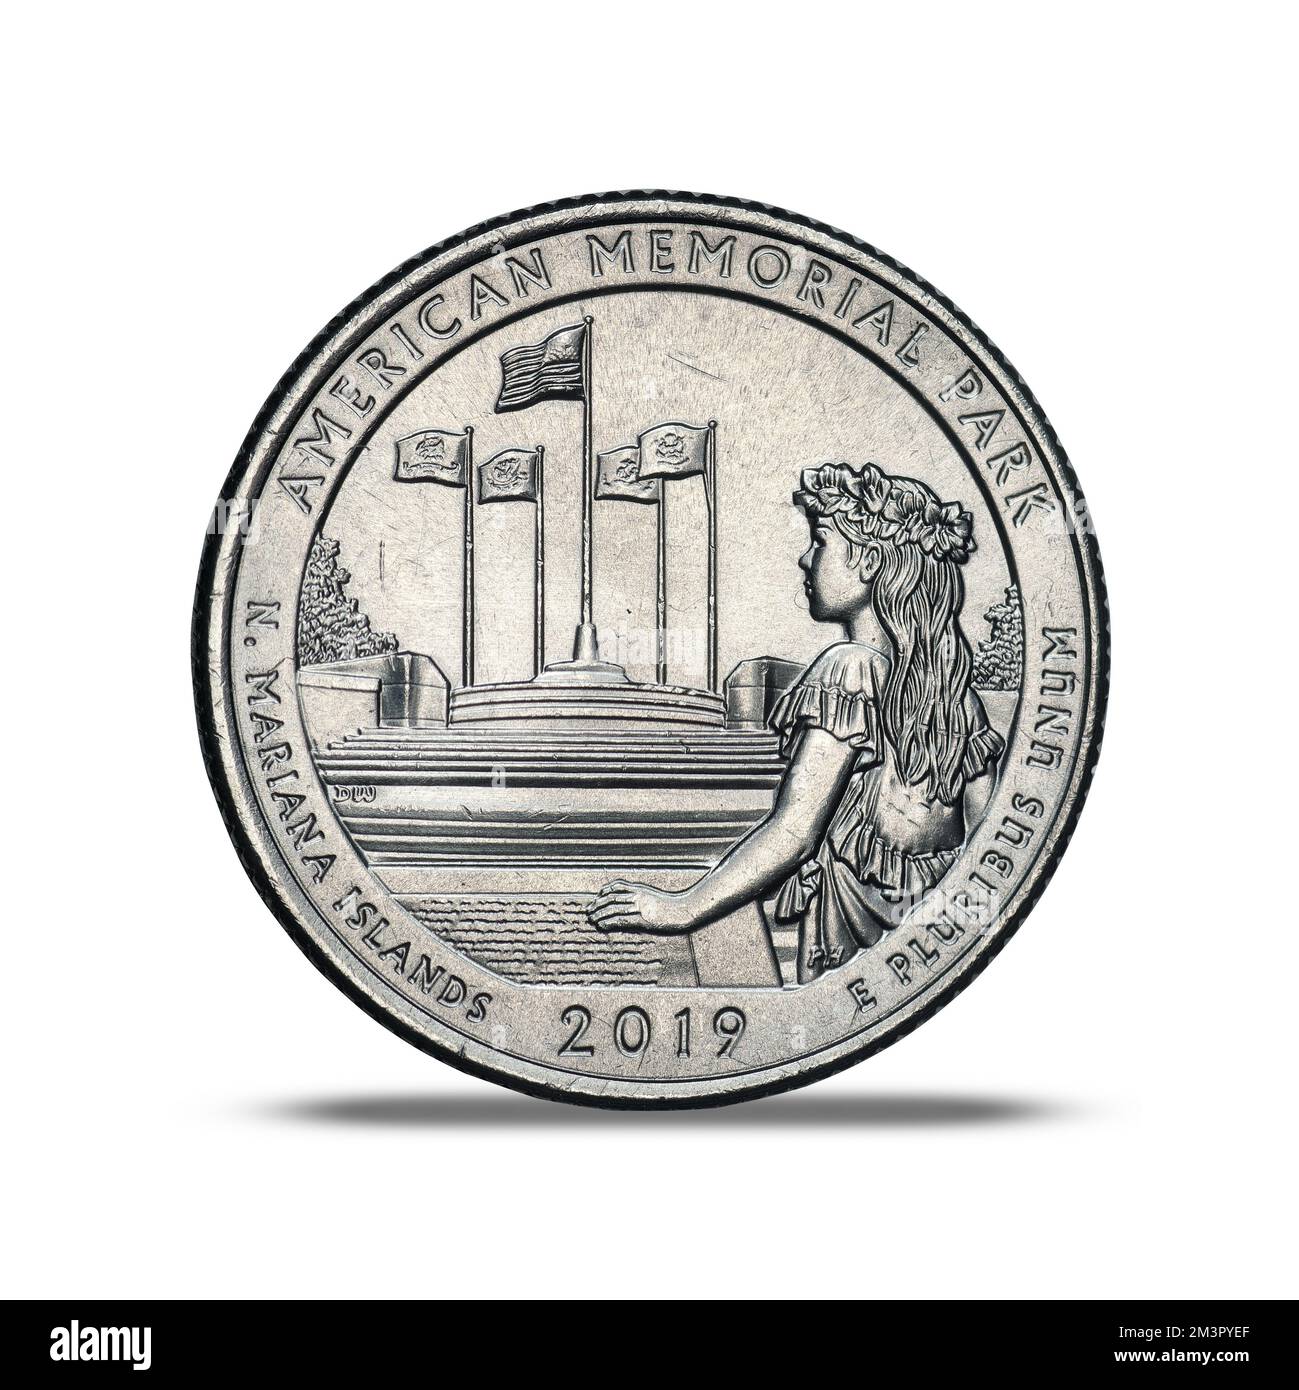 2019 american memorial park coin on white background Stock Photo